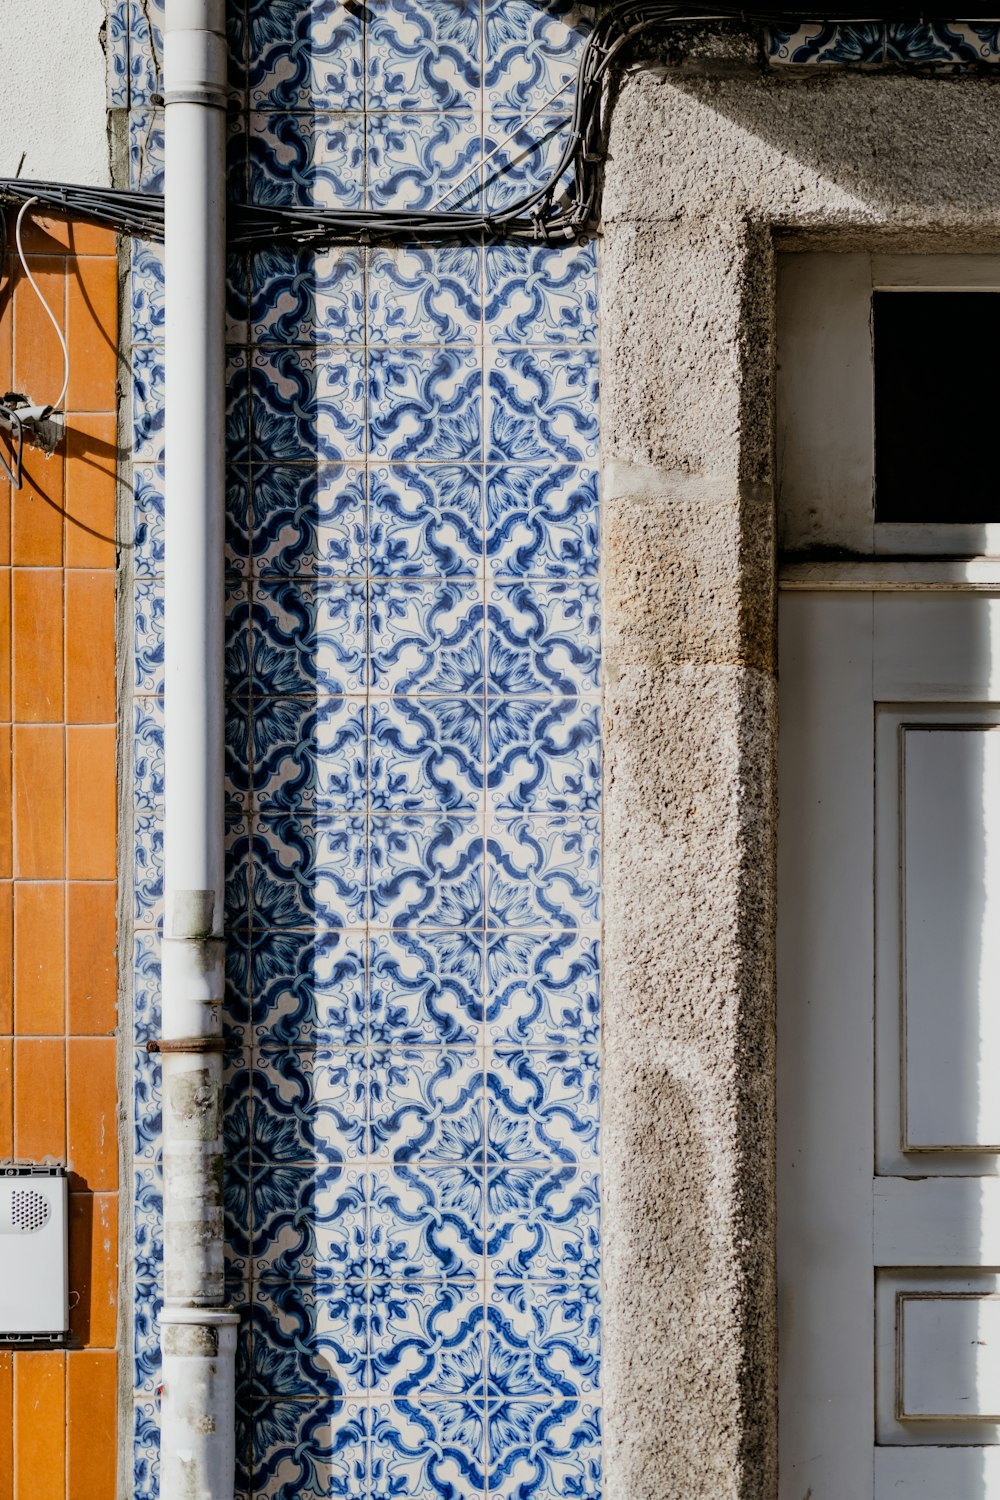 a blue and white tiled wall next to a white door